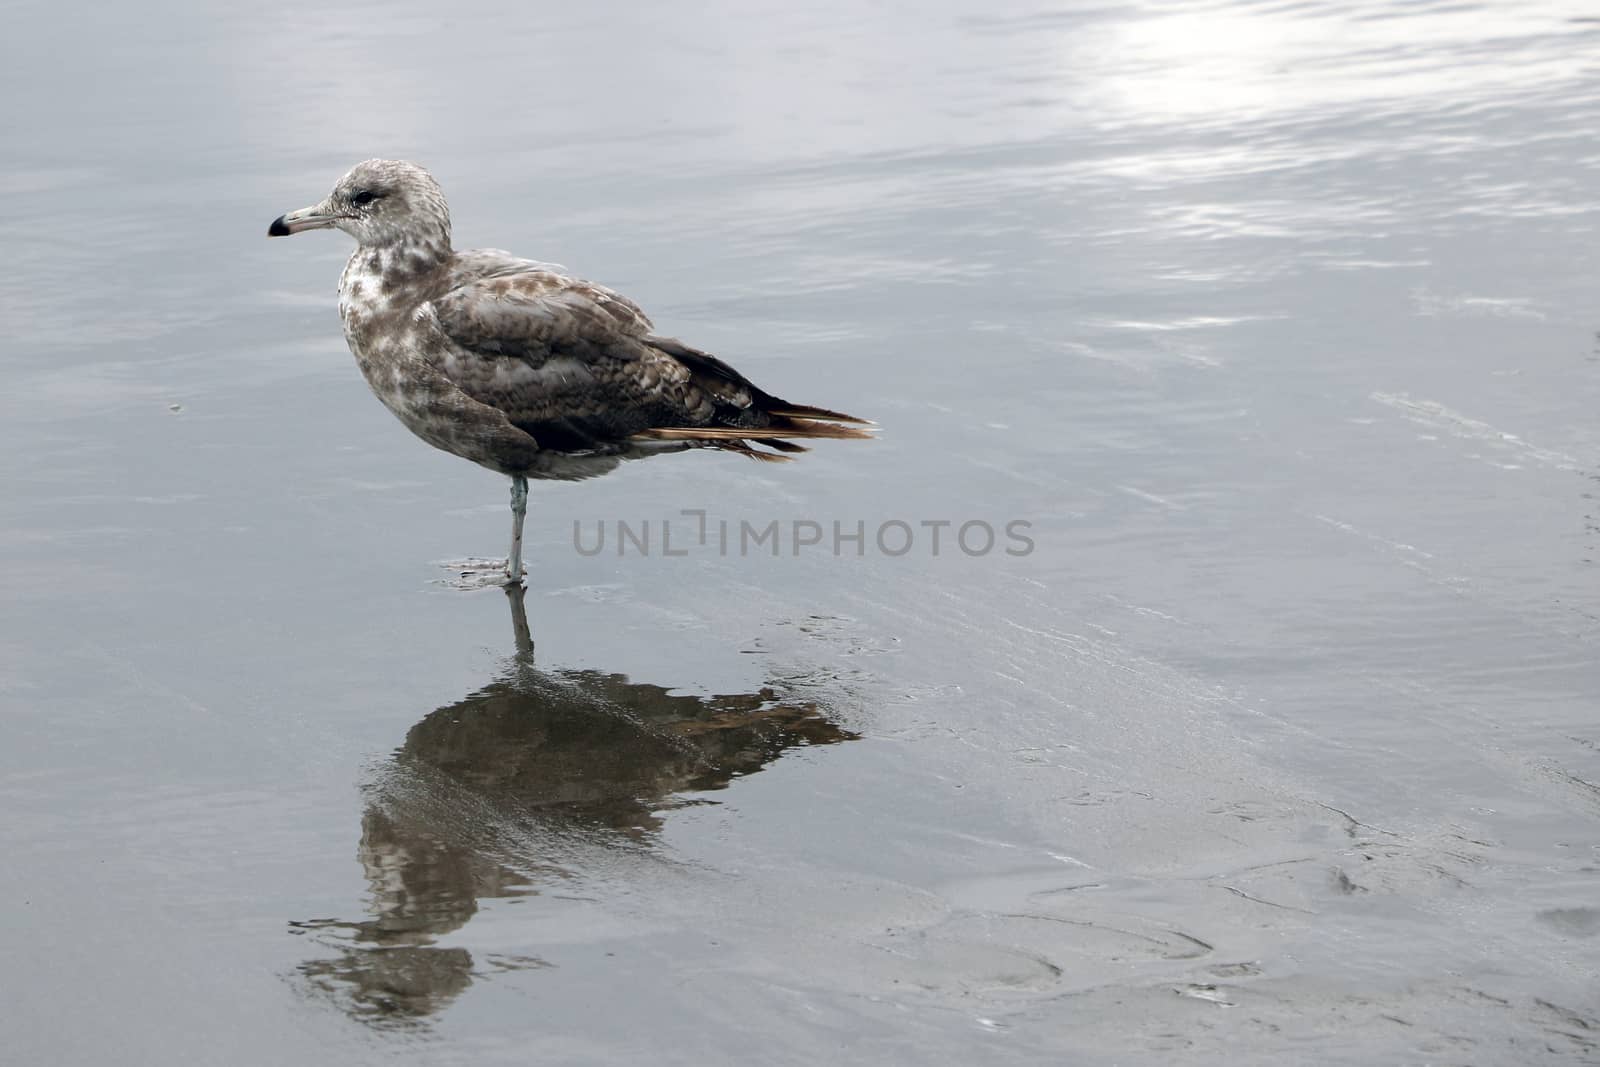 A beautiful gull stands on the coast of the sea or the ocean